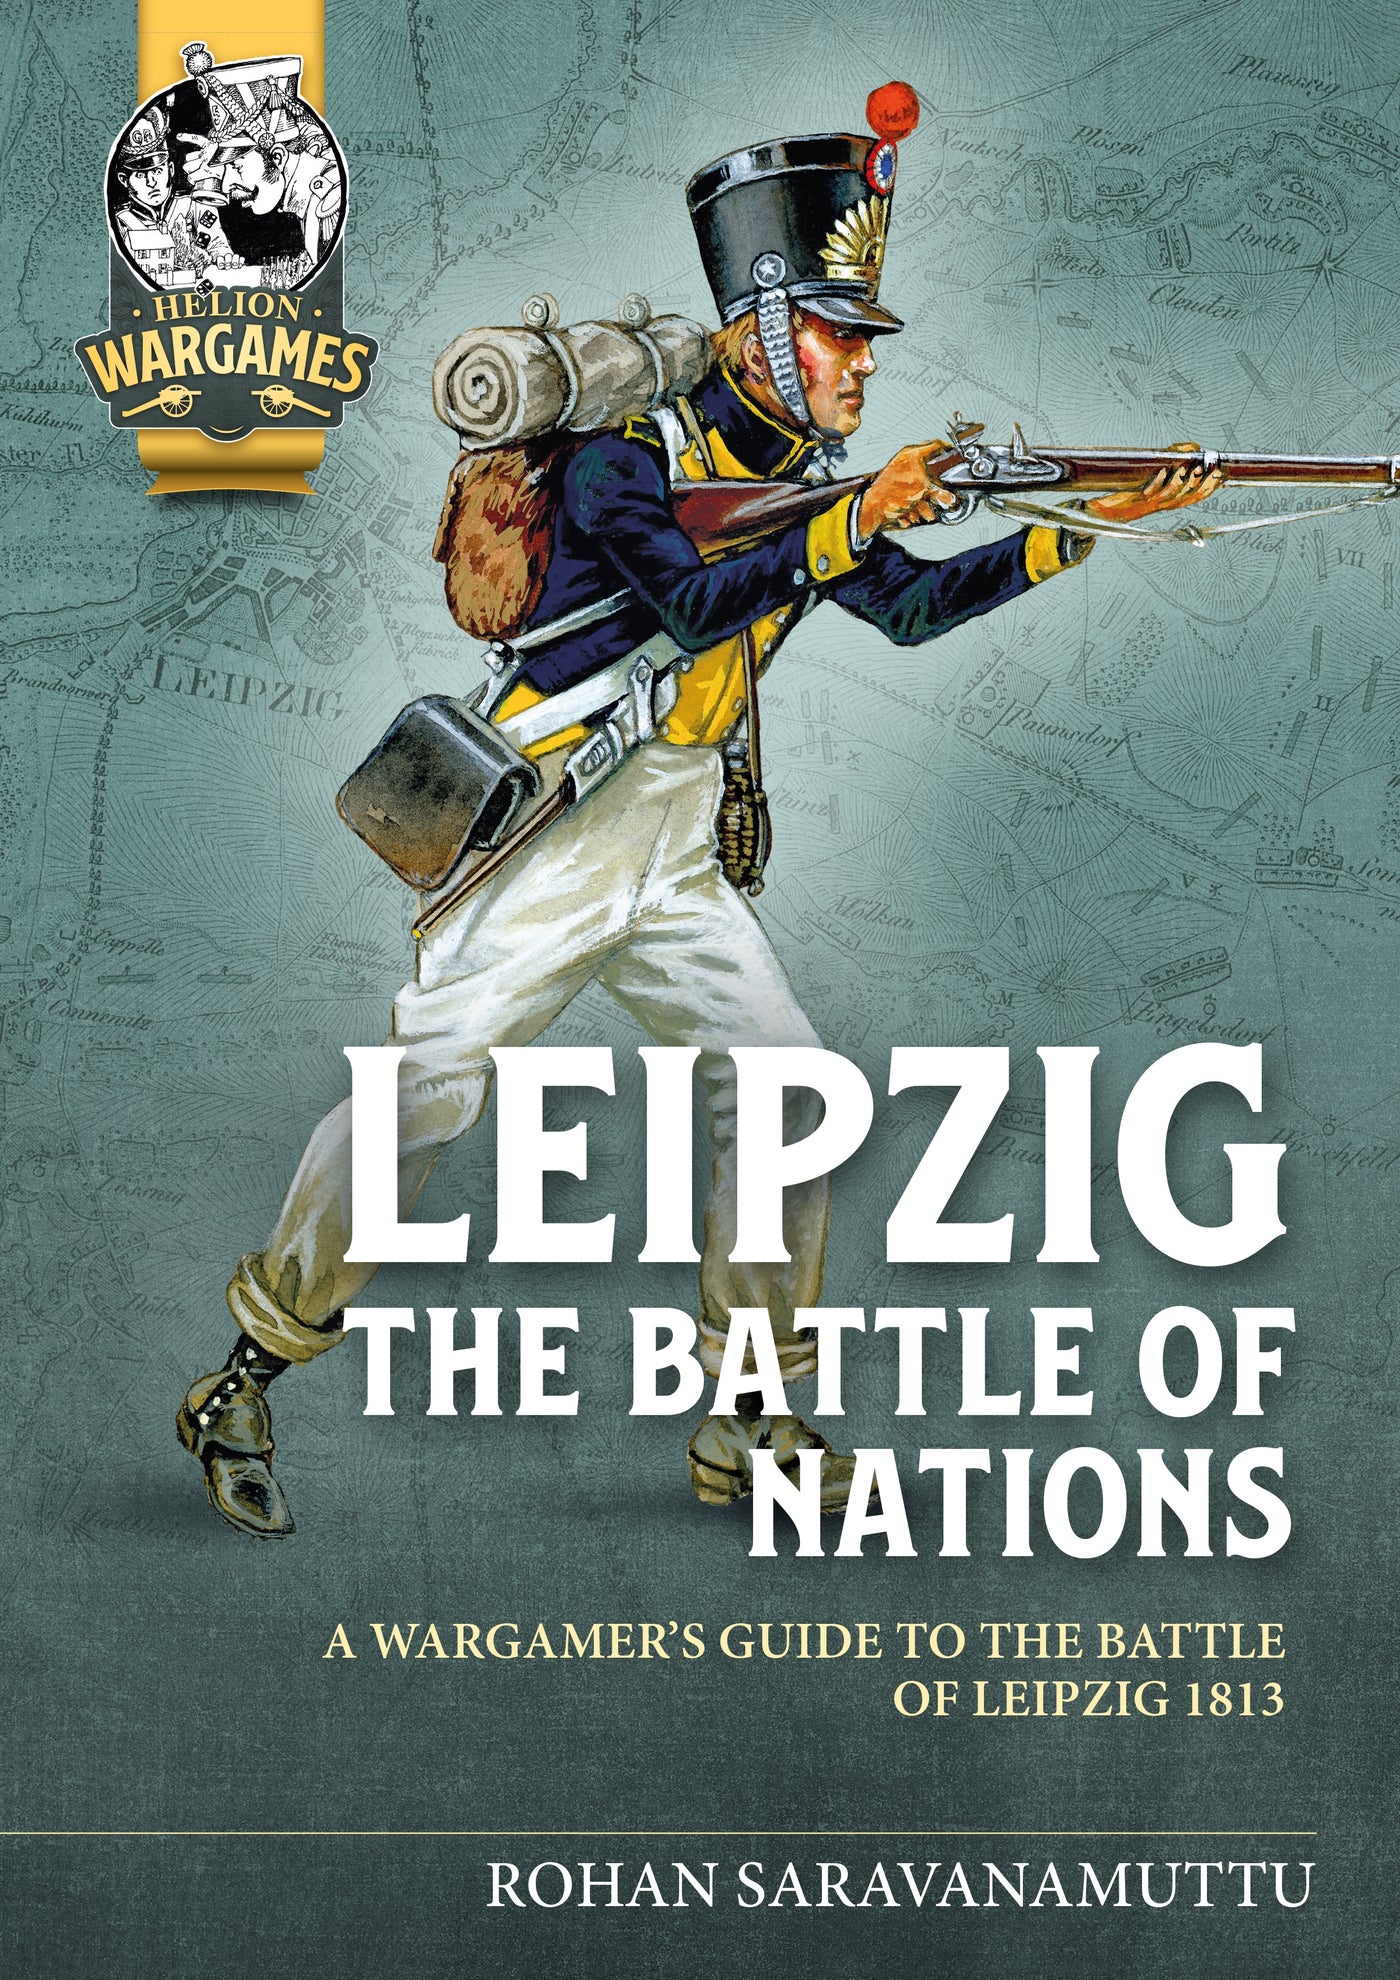 Leipzig - The Battle of Nations